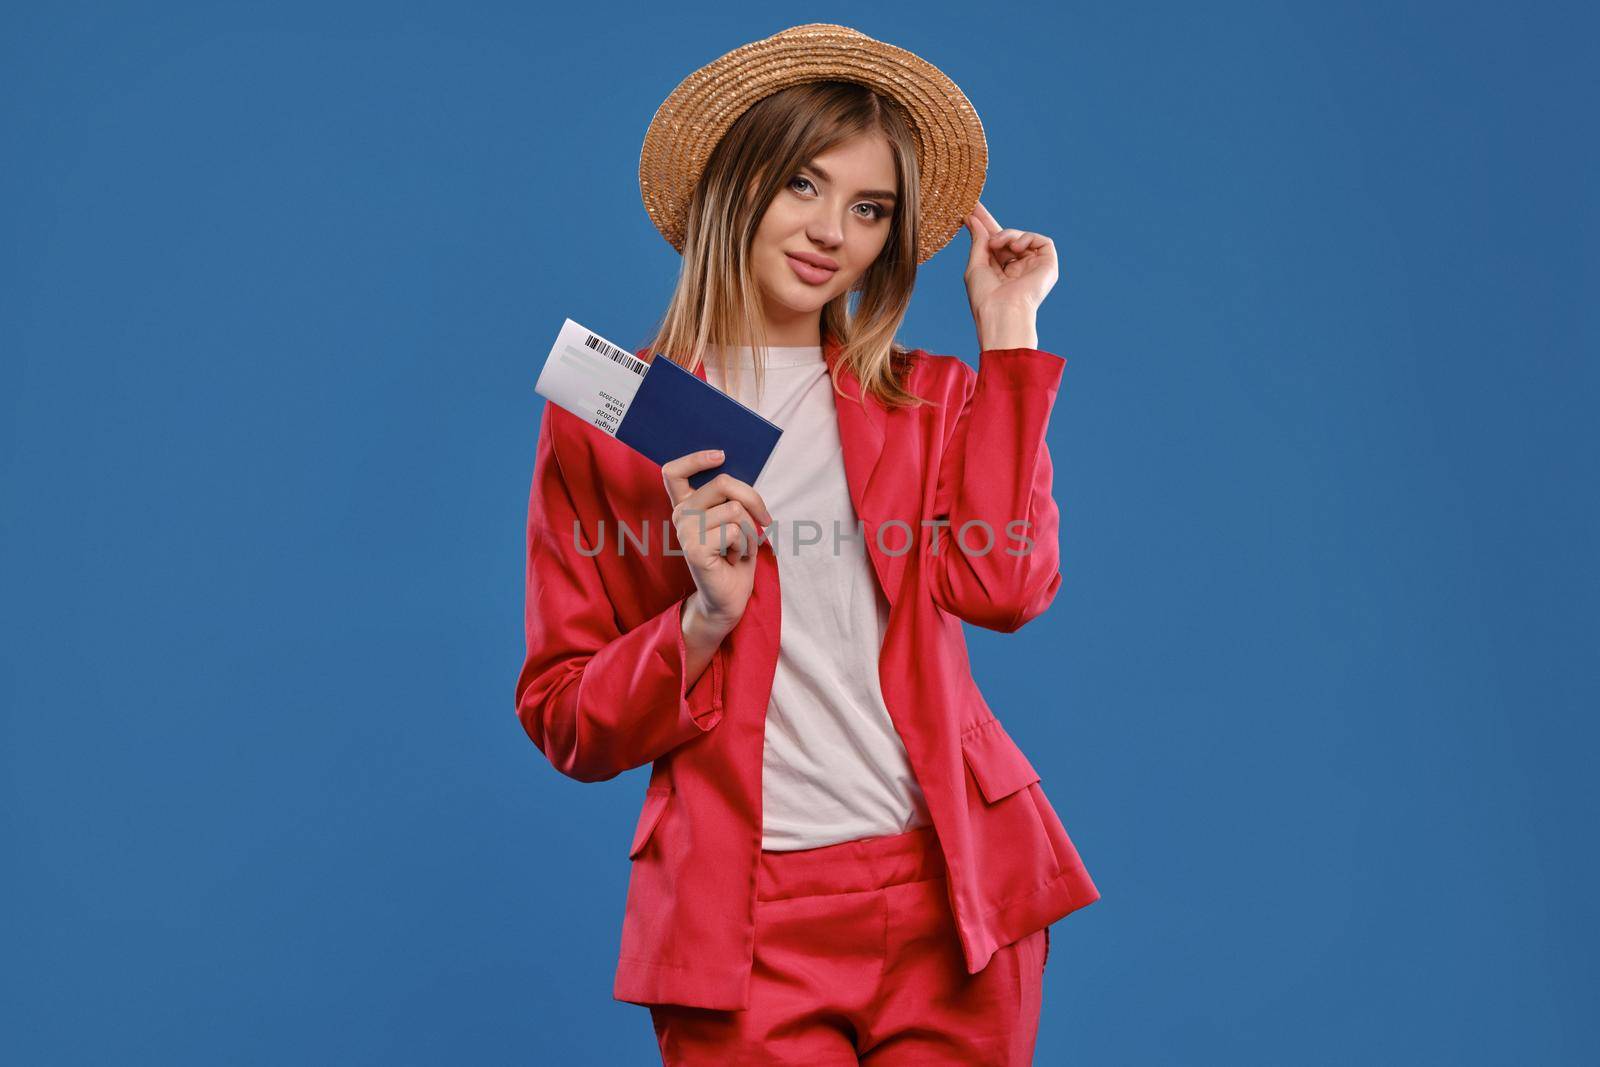 Alluring blonde model in straw hat, white blouse and red pantsuit. She is smiling, touching headdress, holding passport and ticket, posing on blue background. Travelling concept. Close-up, copy space